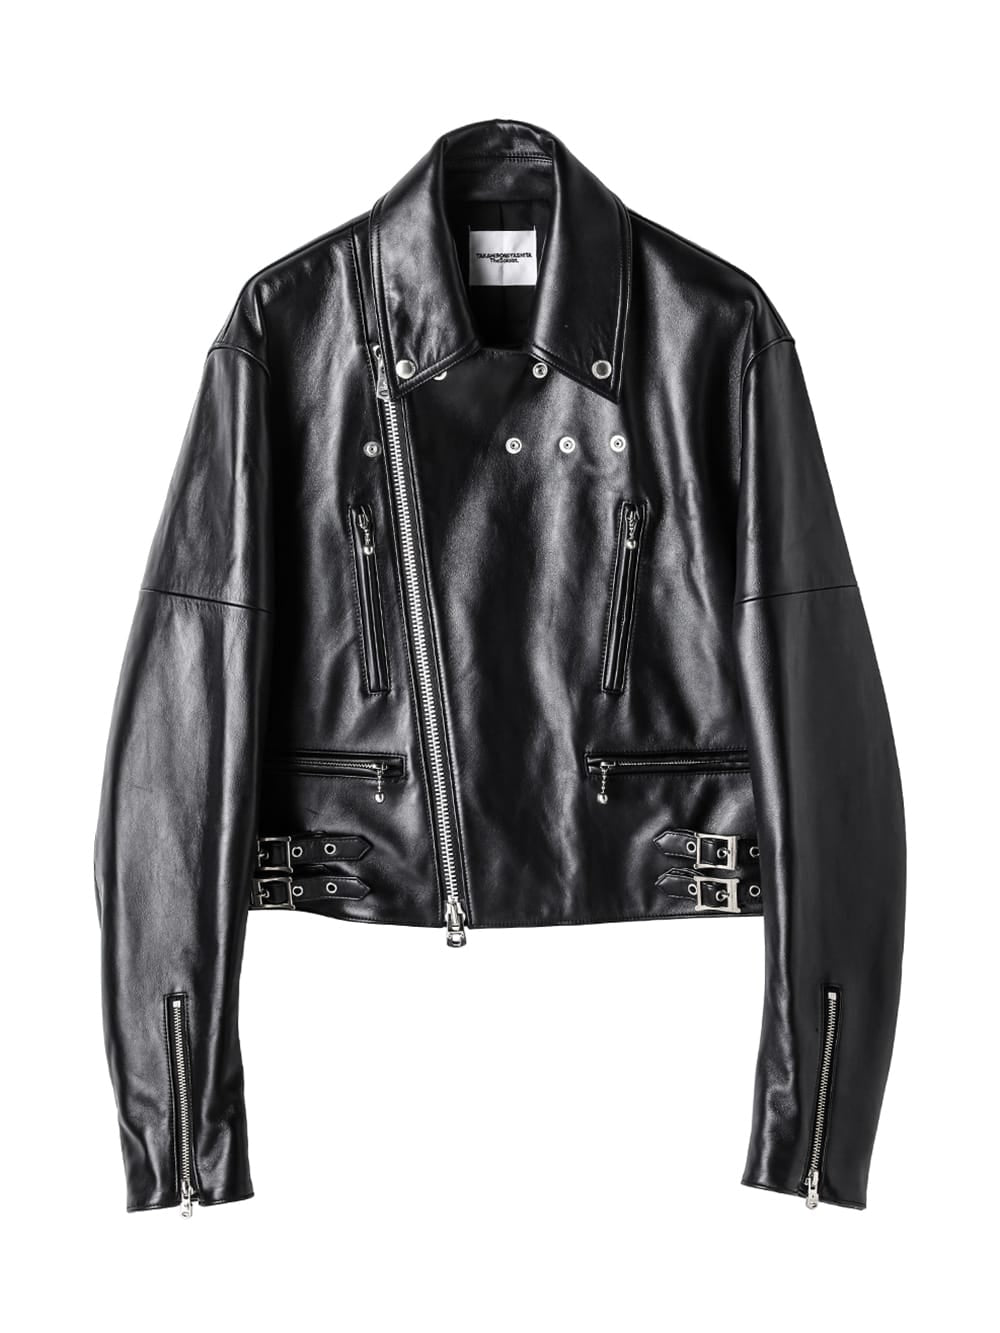 sj.0019bAW23-black two-way cropped riders jacket. THE TWO OF US 